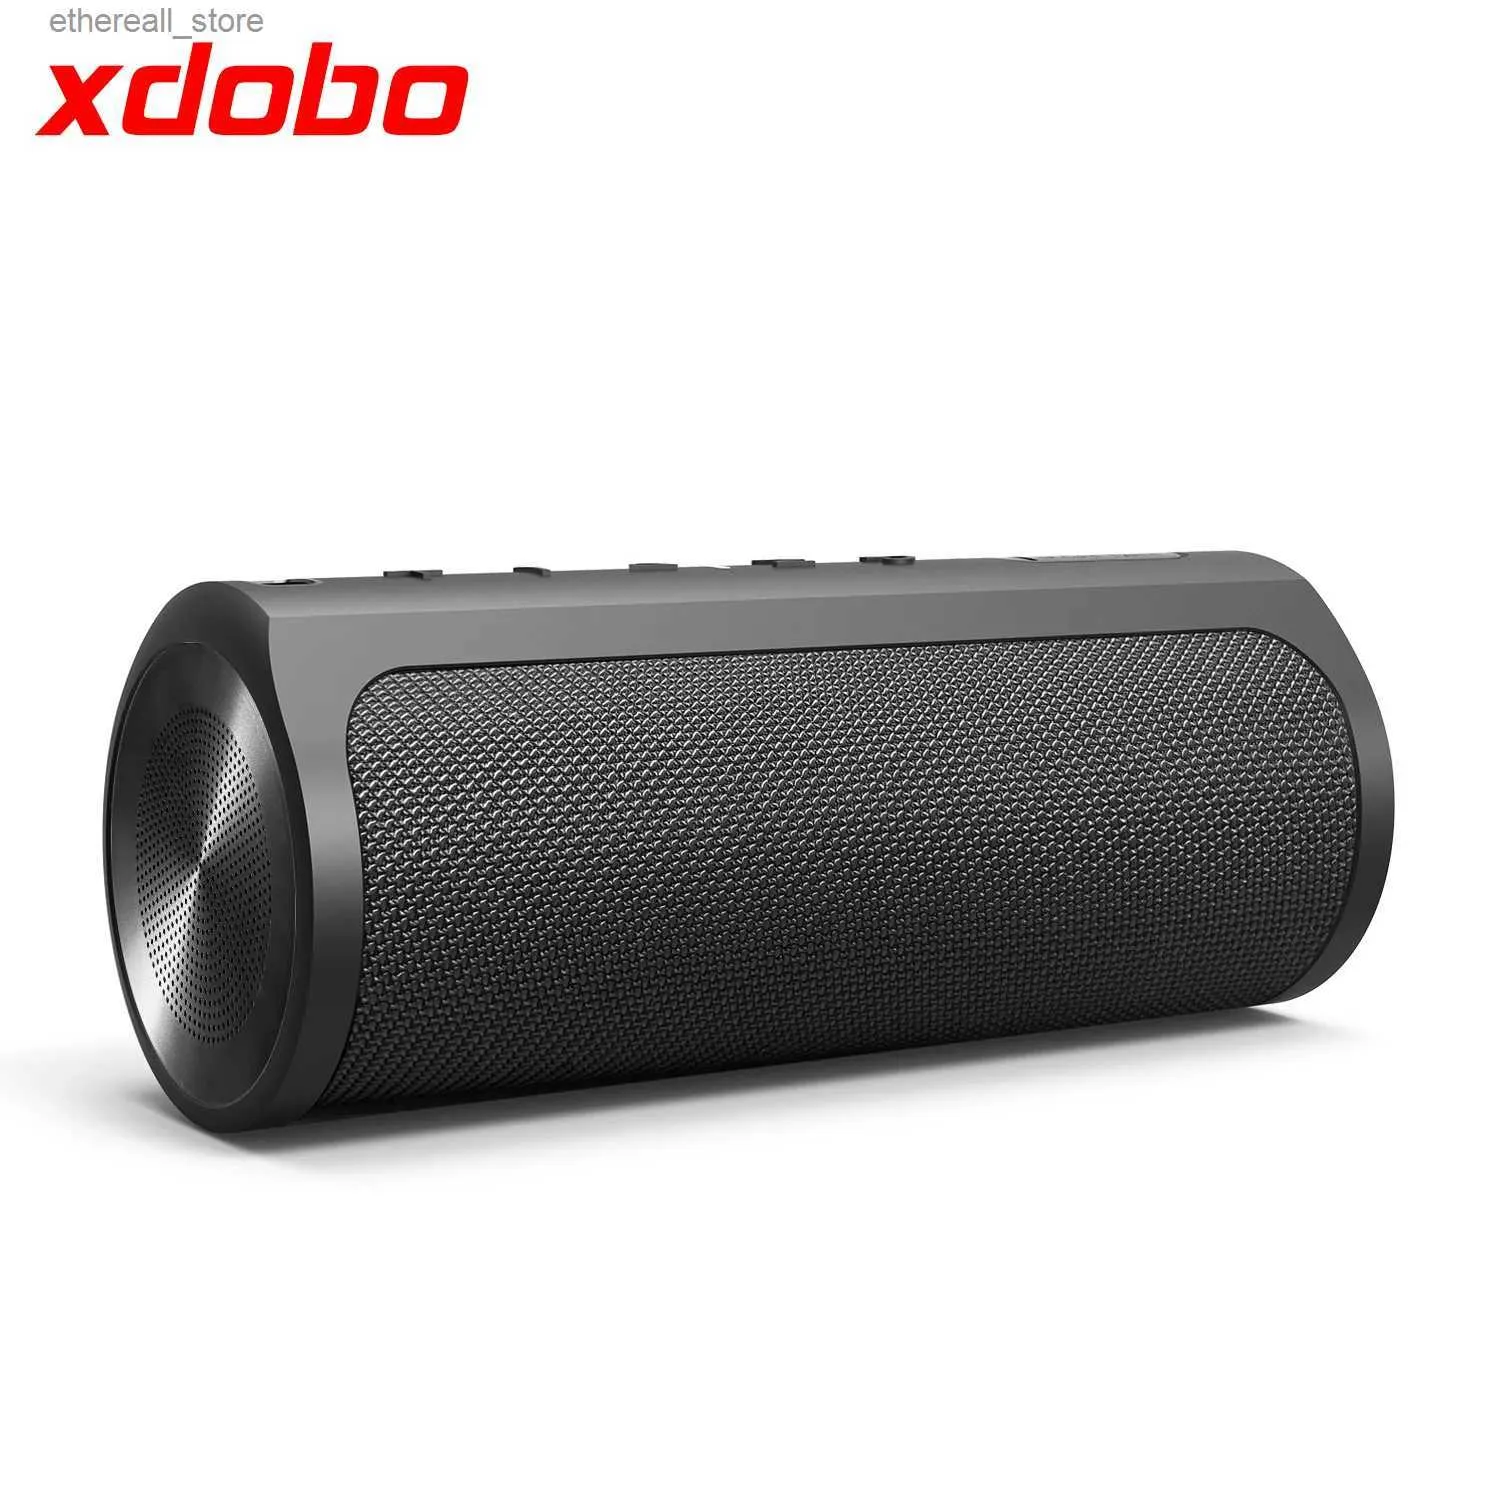 Cell Phone Speakers XDOBO Hero 1999 50W Bluetooth 5.0 Waterproof Subwoofer Outdoor Portable Sound Column with 6600mAh Large Capacity Battery Boombox Q231117